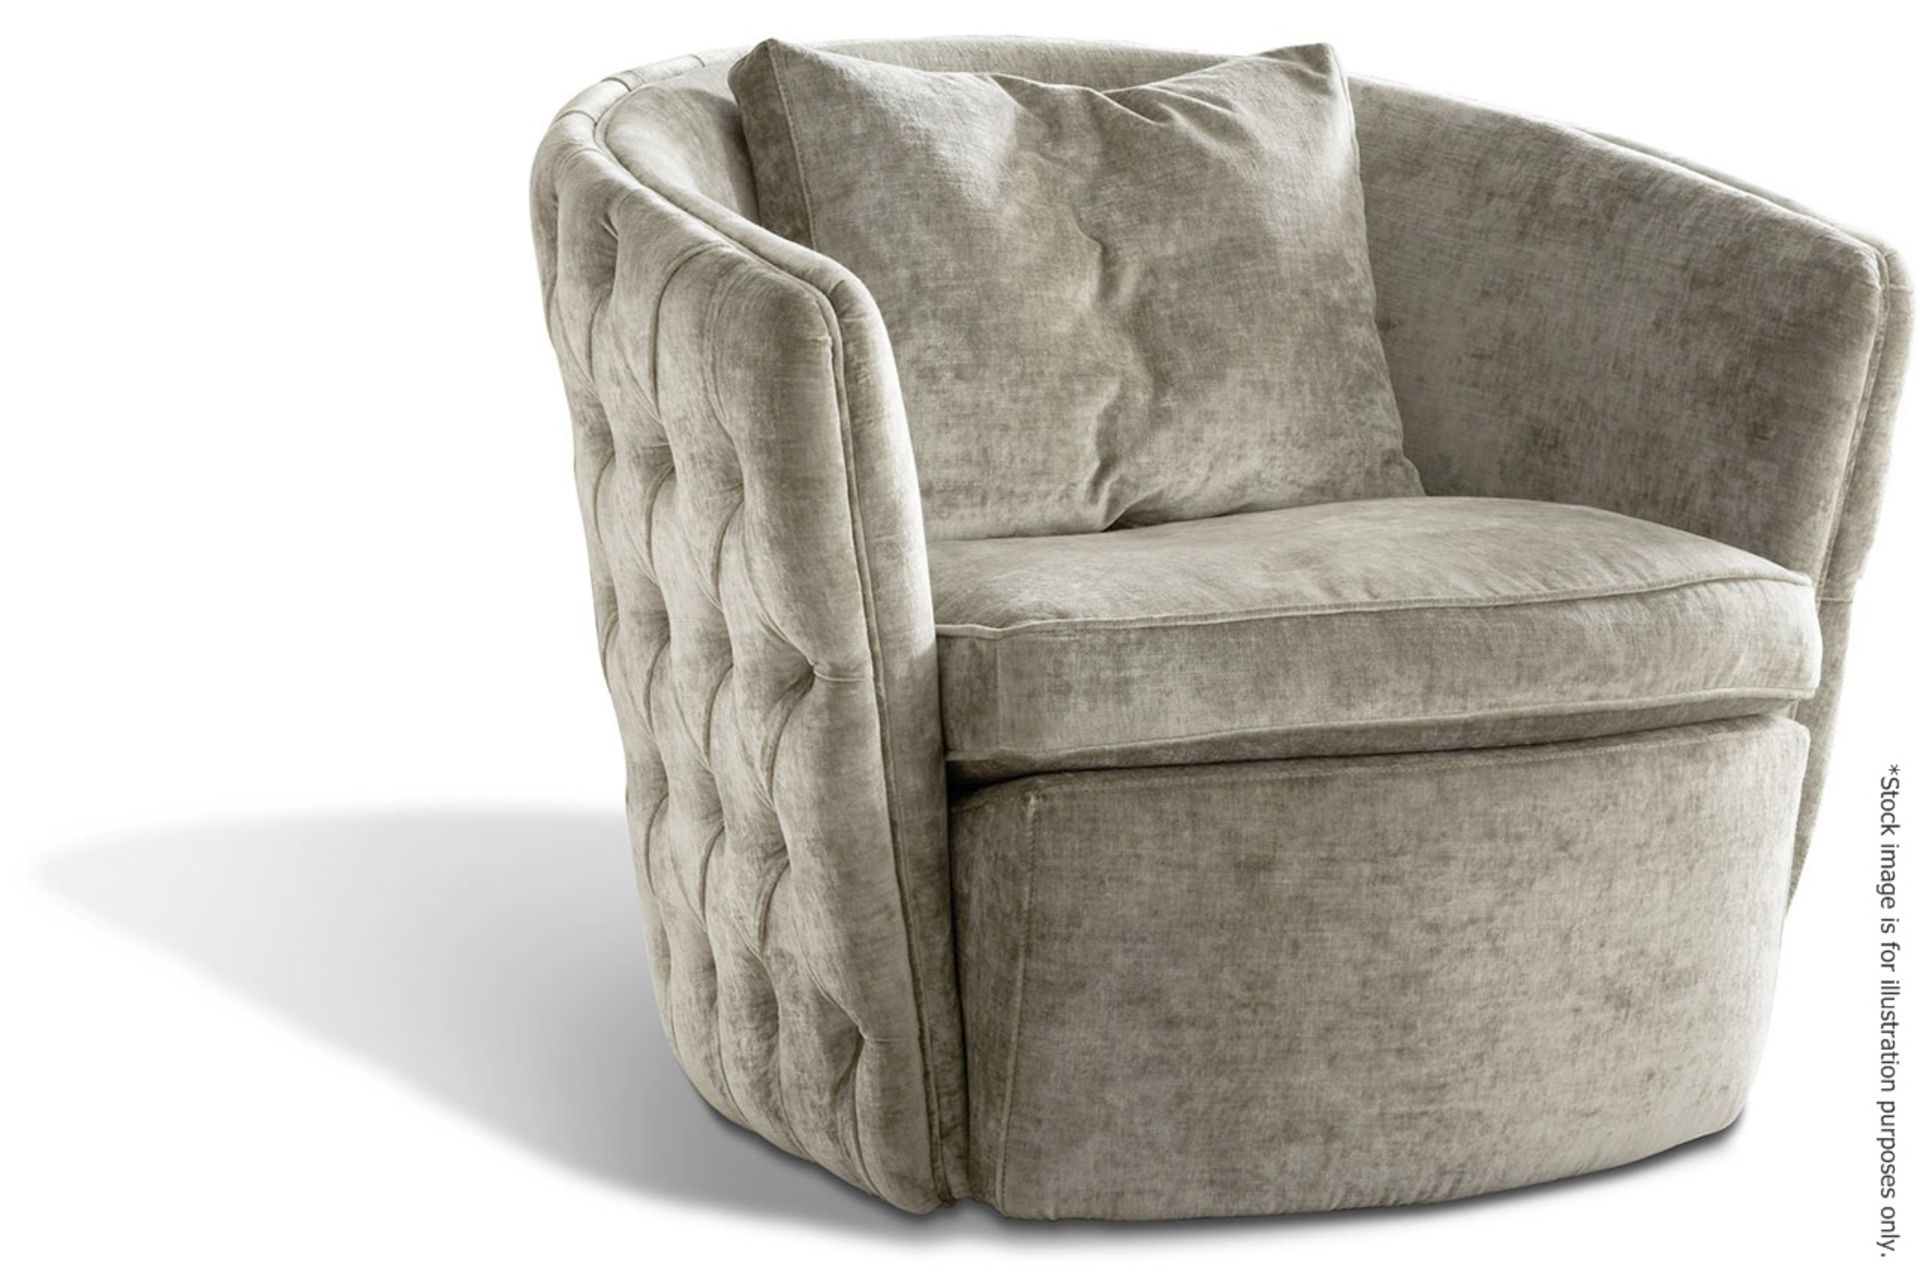 1 x GIORGIO COLLECTION 'LIFETIME' Luxury Upholstered Swivel Armchair - Original RRP £2,196.00 - Image 3 of 13